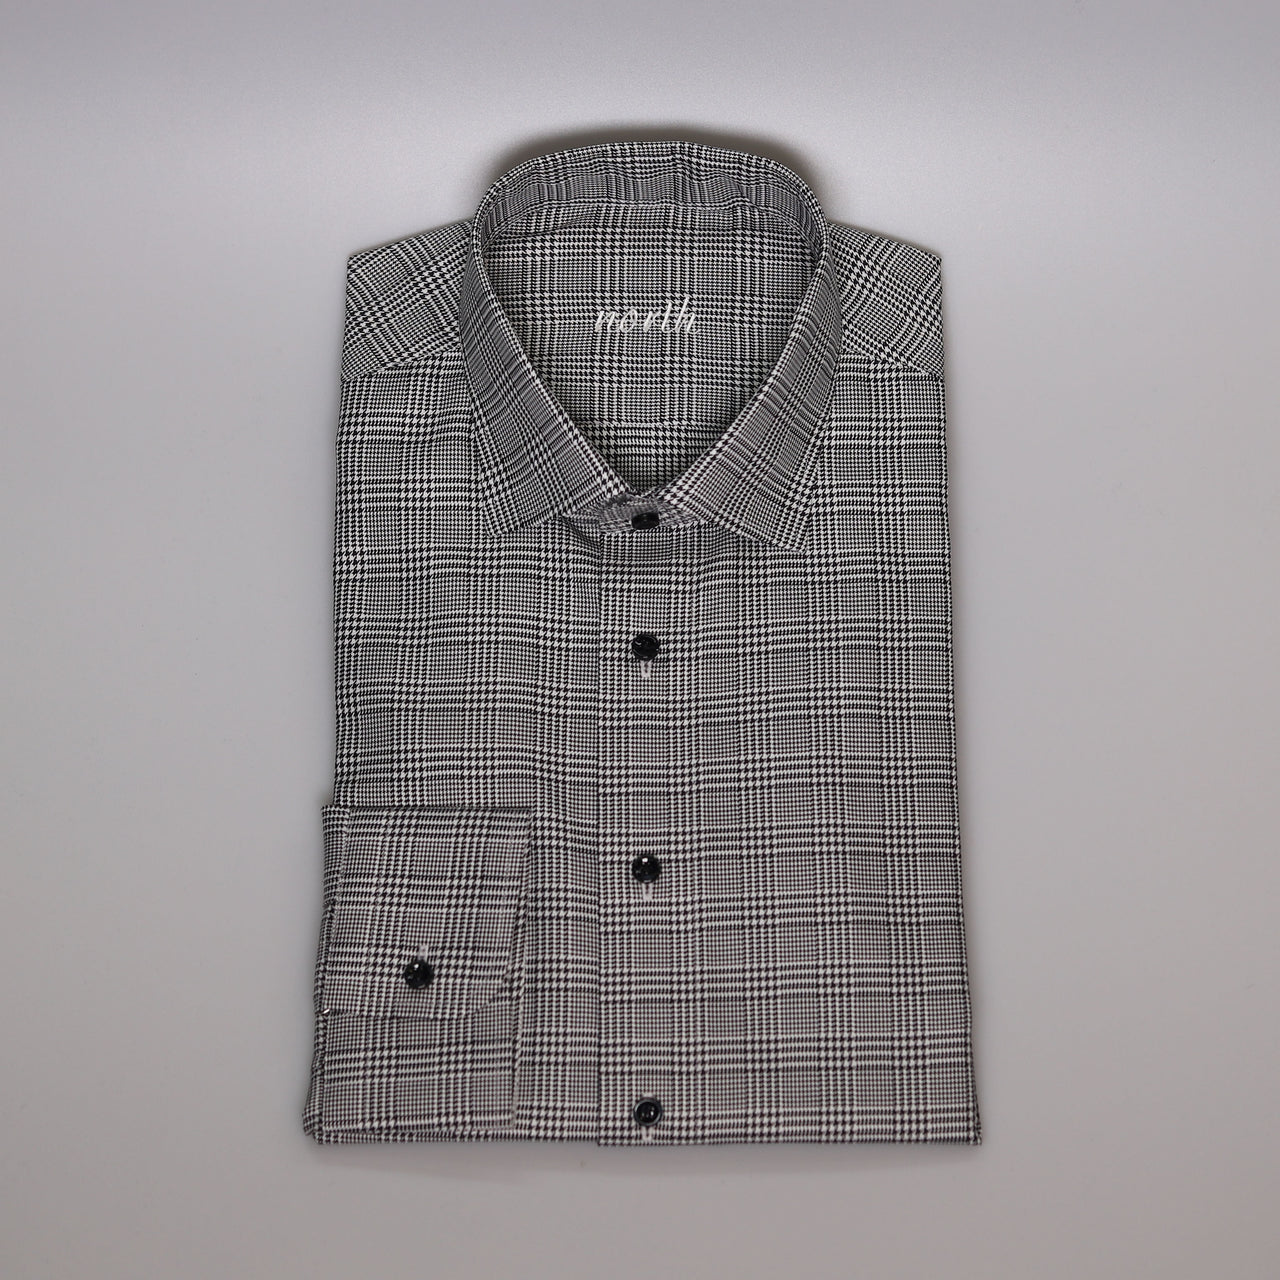 North Chequered Dogtooth Shirt